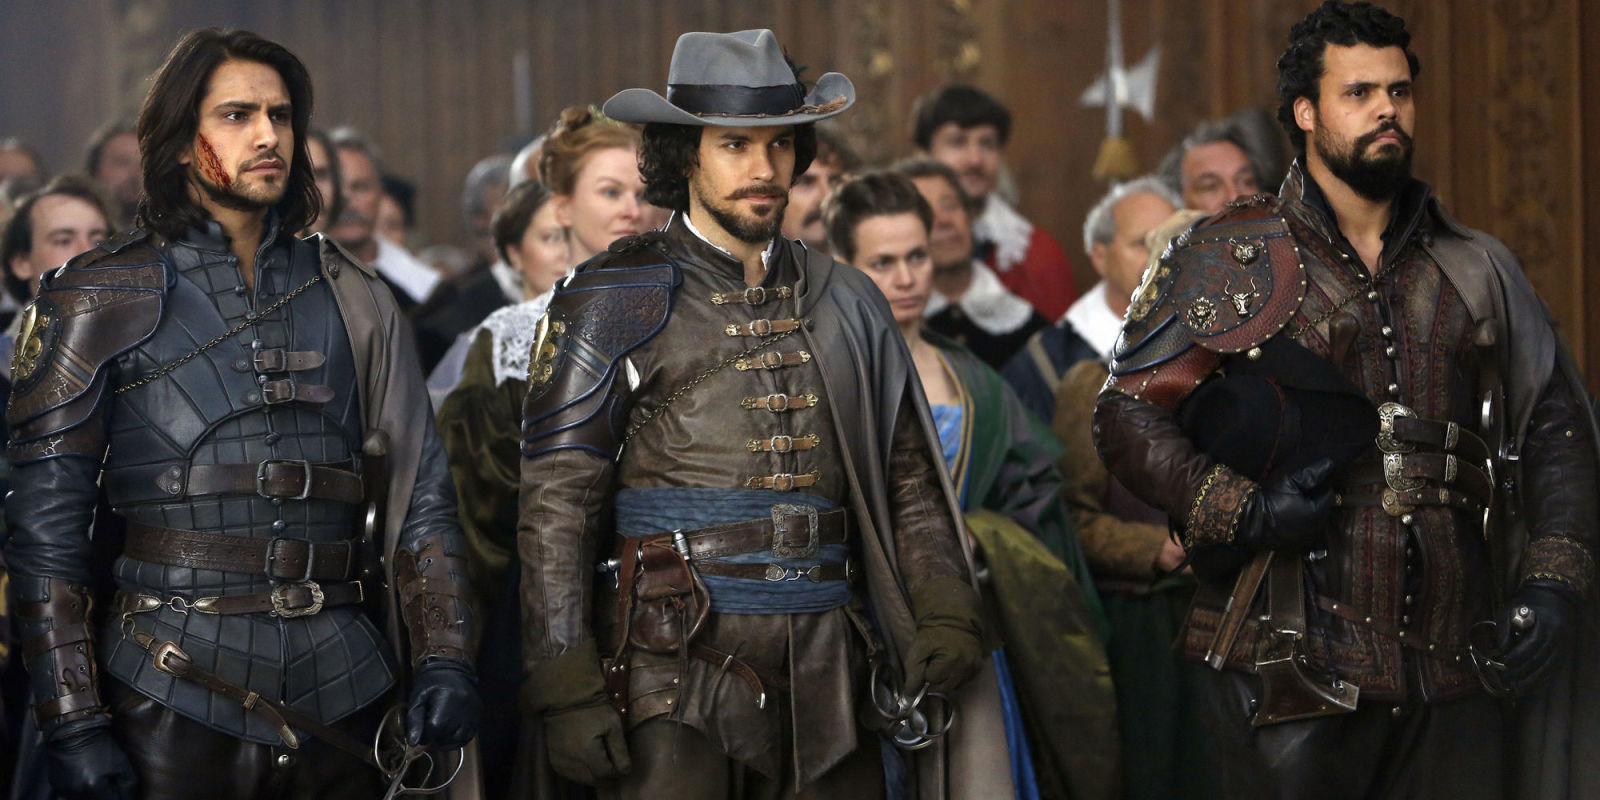 The Musketeers #1